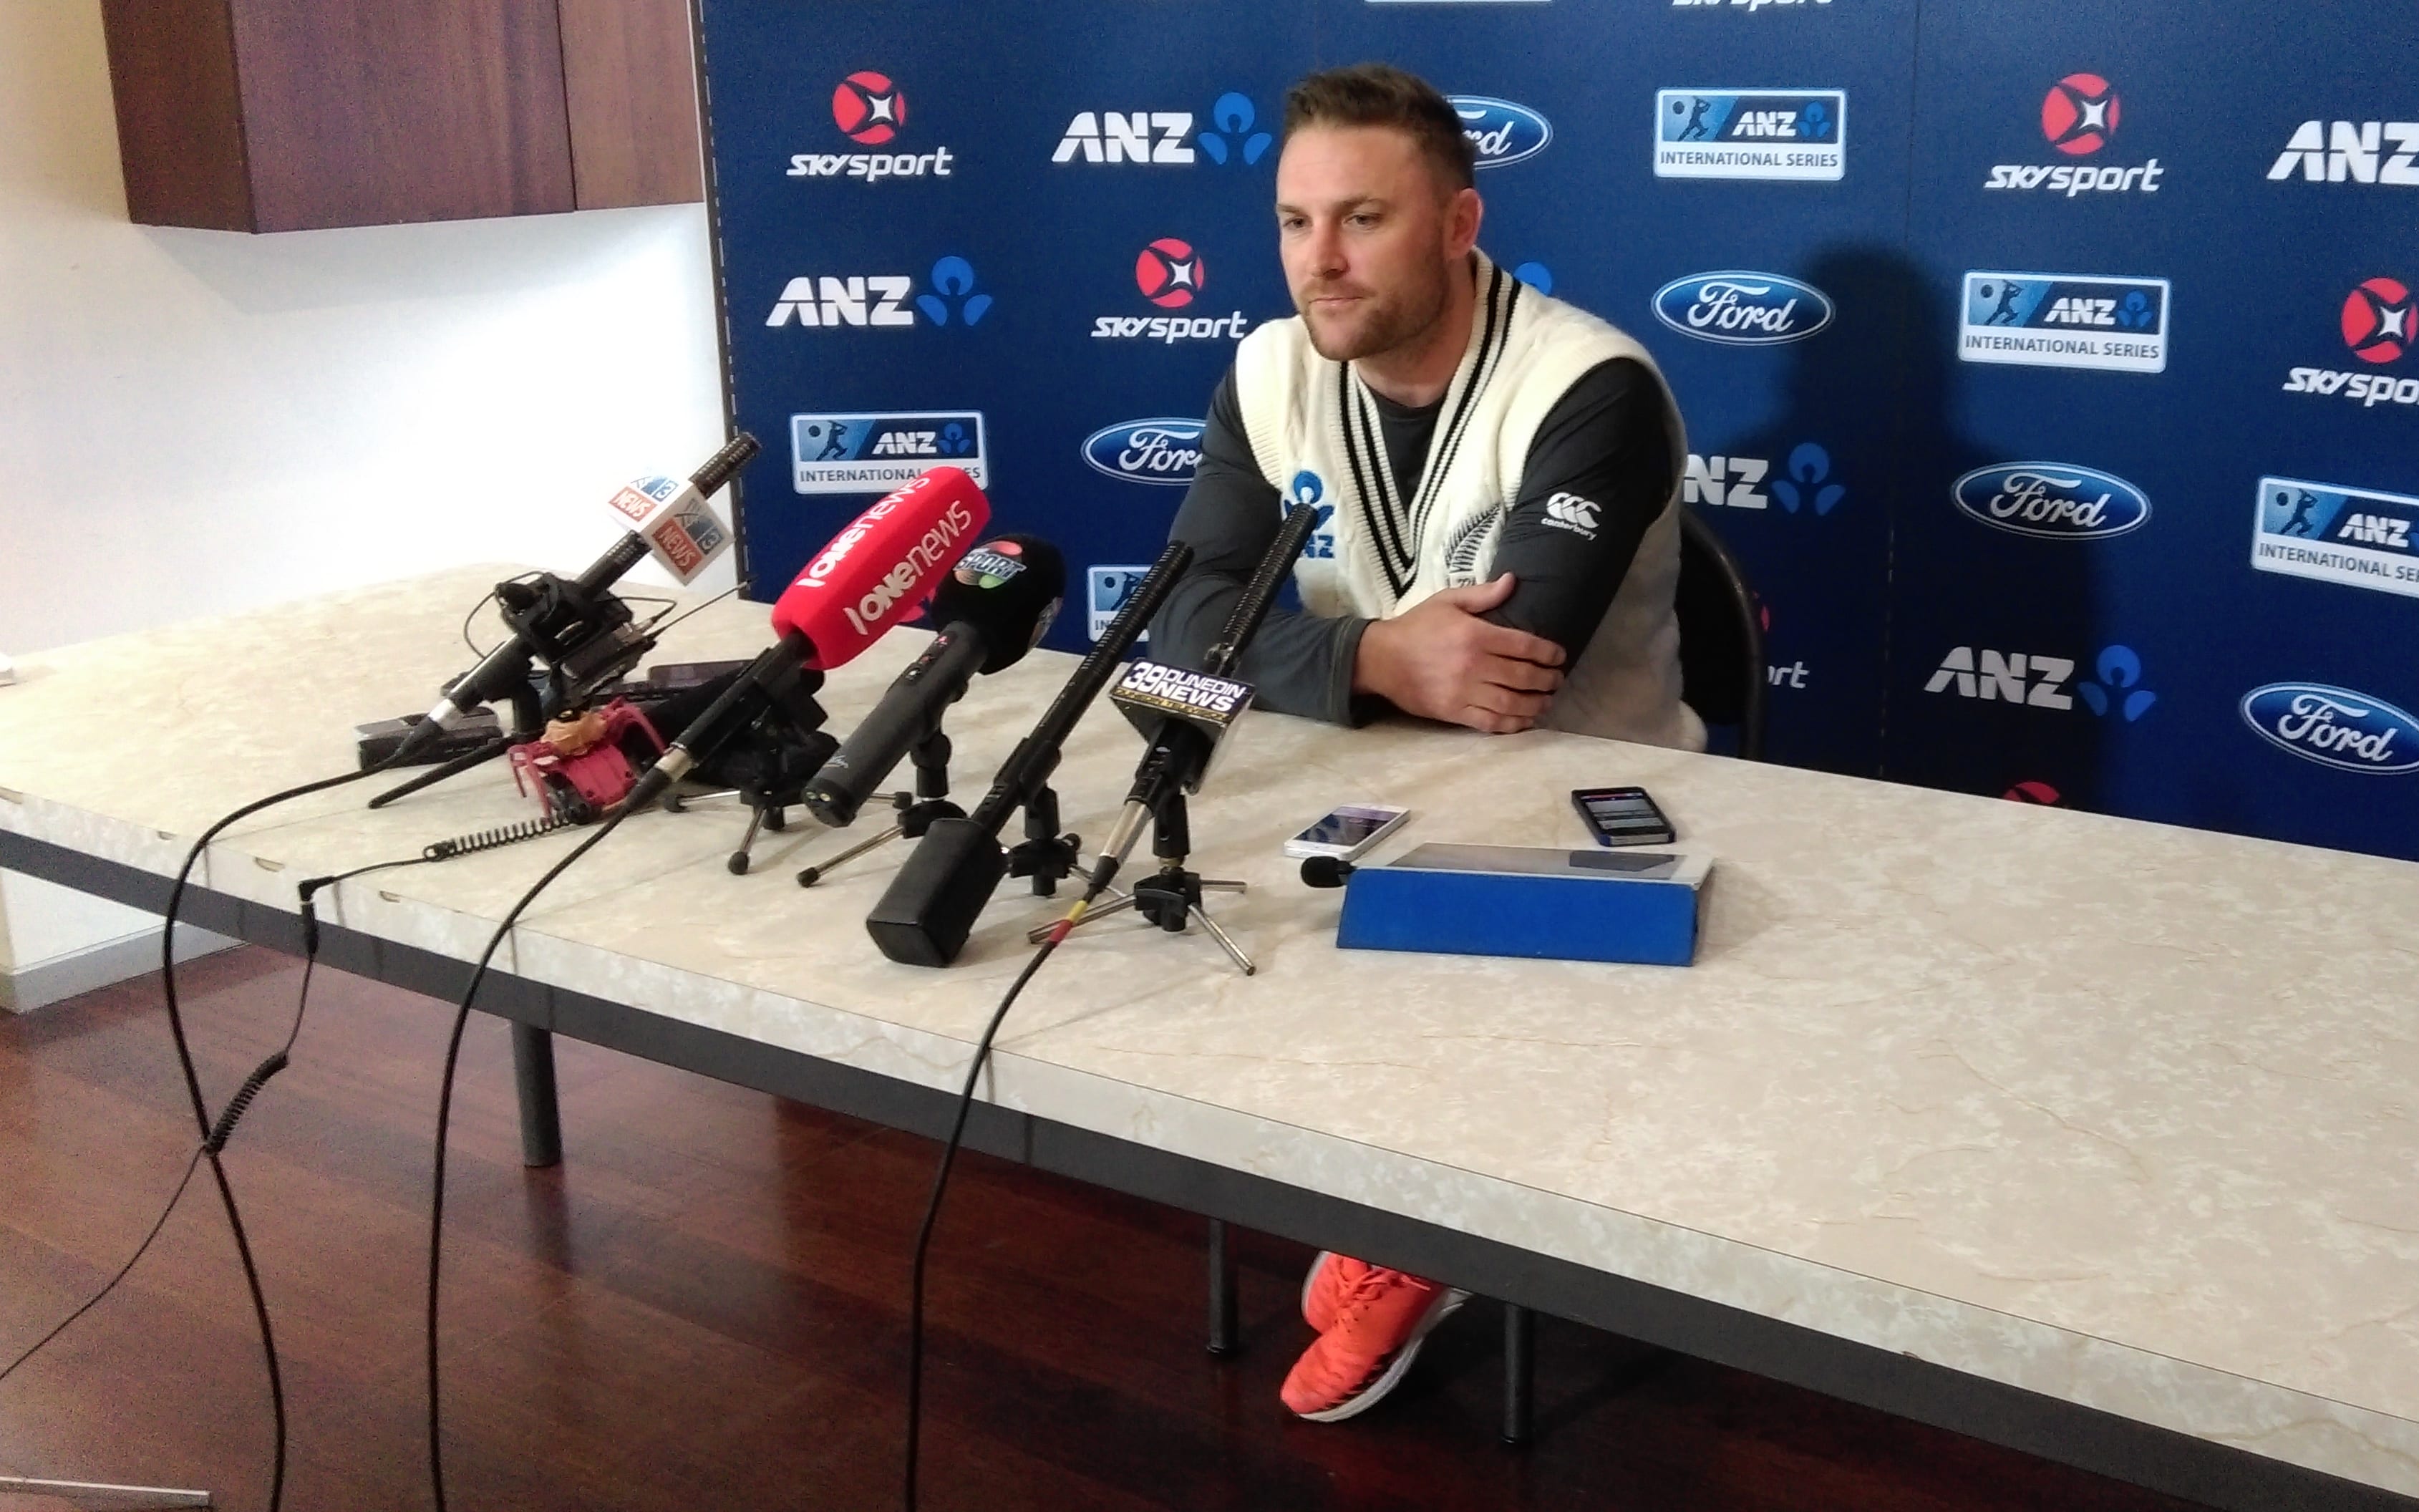 Black Caps skipper Brendon McCullum during a news conference in Dunedin on 9 December 2015, where he was asked about Chris Cairns' perjury trial.